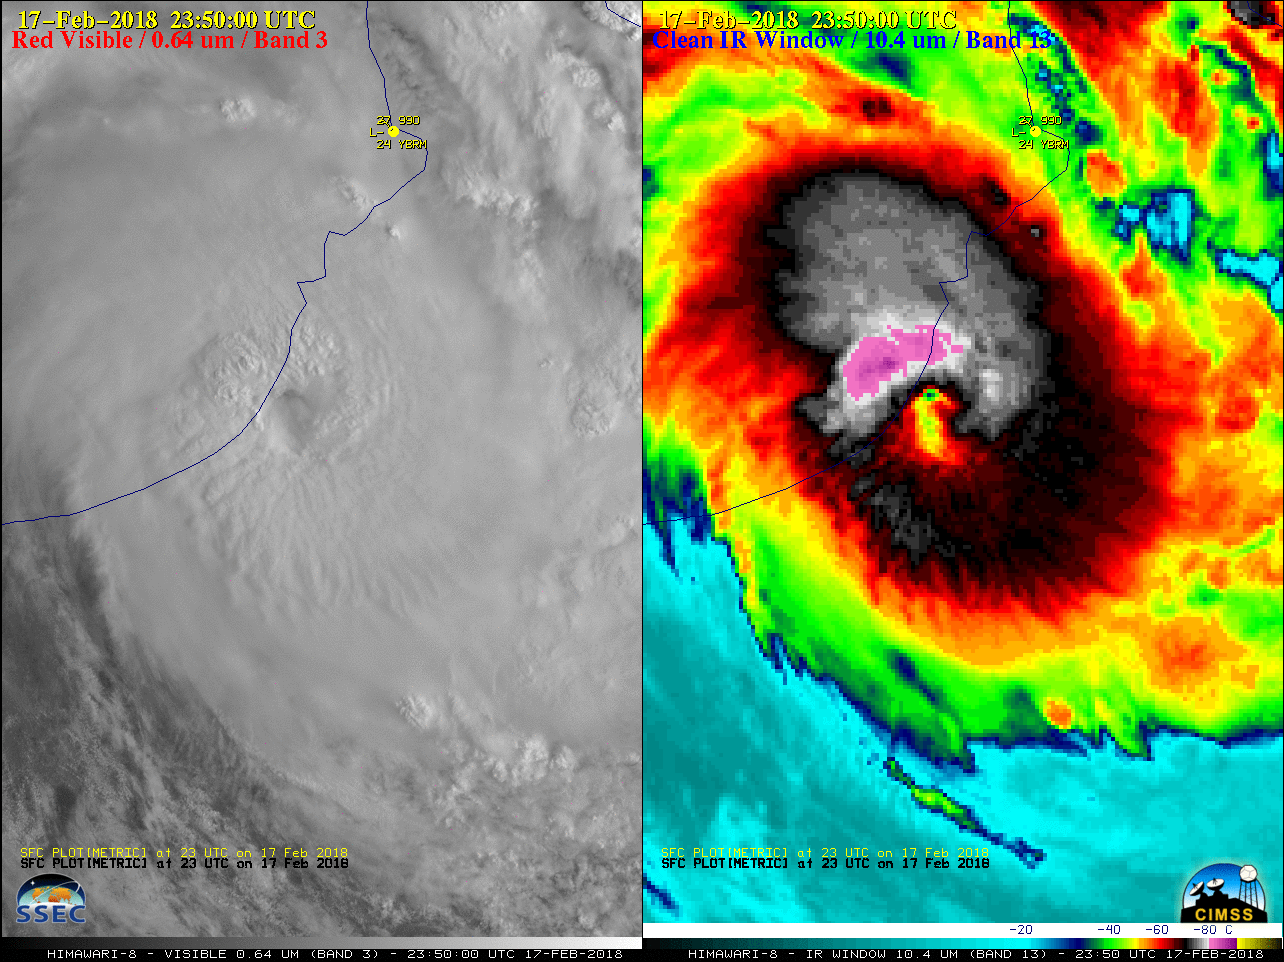 Himawari-8 Visible (0.64 µm, left) and Infrared Window (10.4 µm, right) images, with hourly surface plots at Broome [click to play Animated GIF | MP4 also available] 